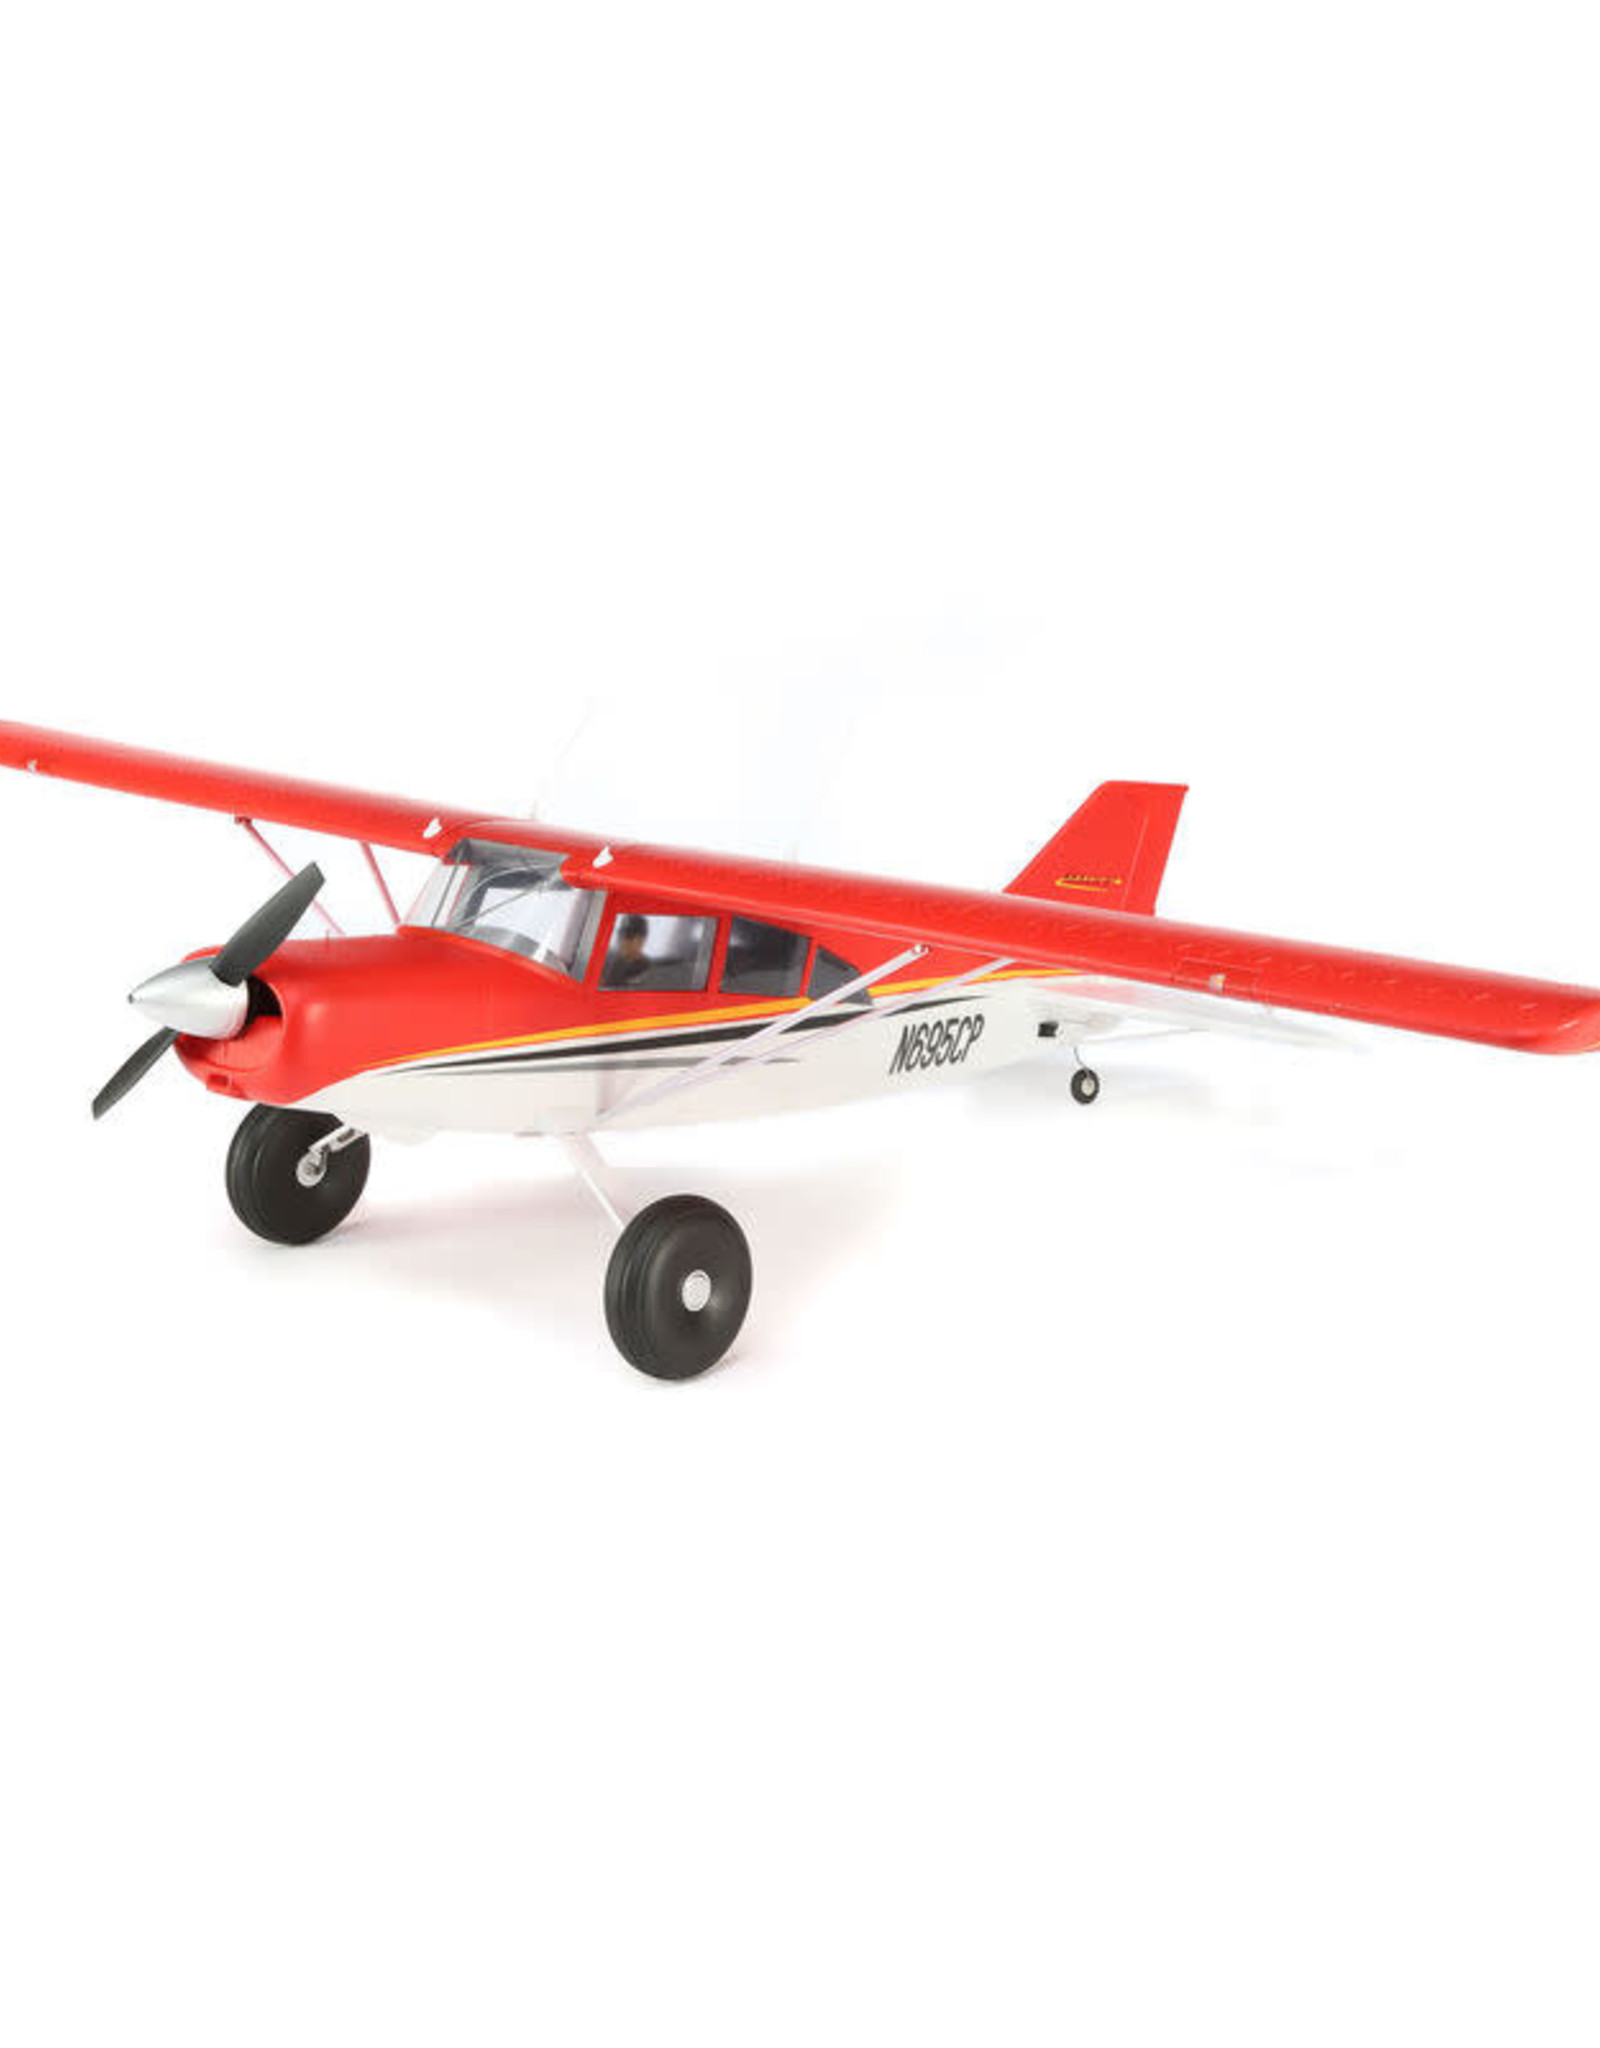 EFL EFL53500 Maule M-7 1.5m BNF Basic with AS3X and SAFE Select, includes Floats